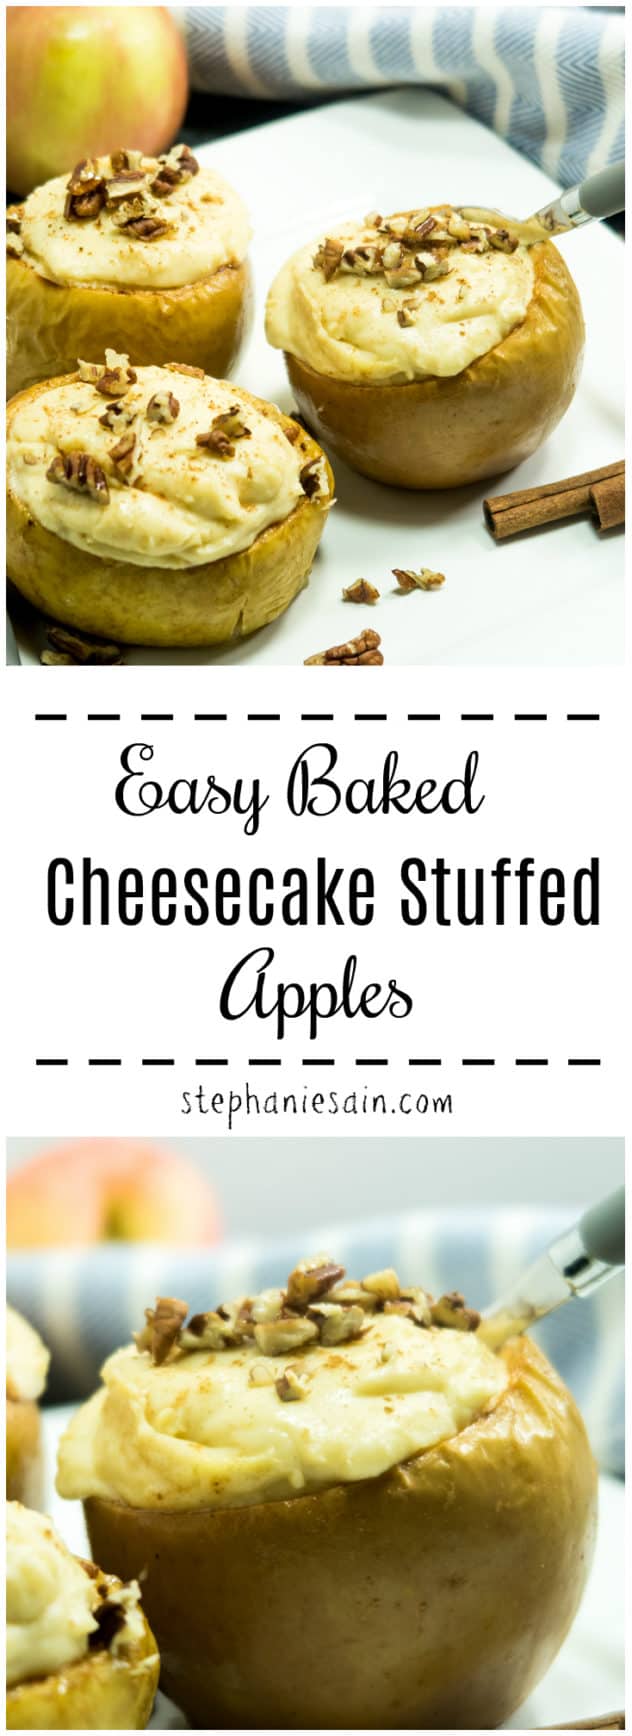 Easy Baked Cheesecake Stuffed Apples are the perfect Fallish dessert. They taste like apple pie & cheesecake combined and are made without any added refined sugars. Gluten Free & Vegetarian.